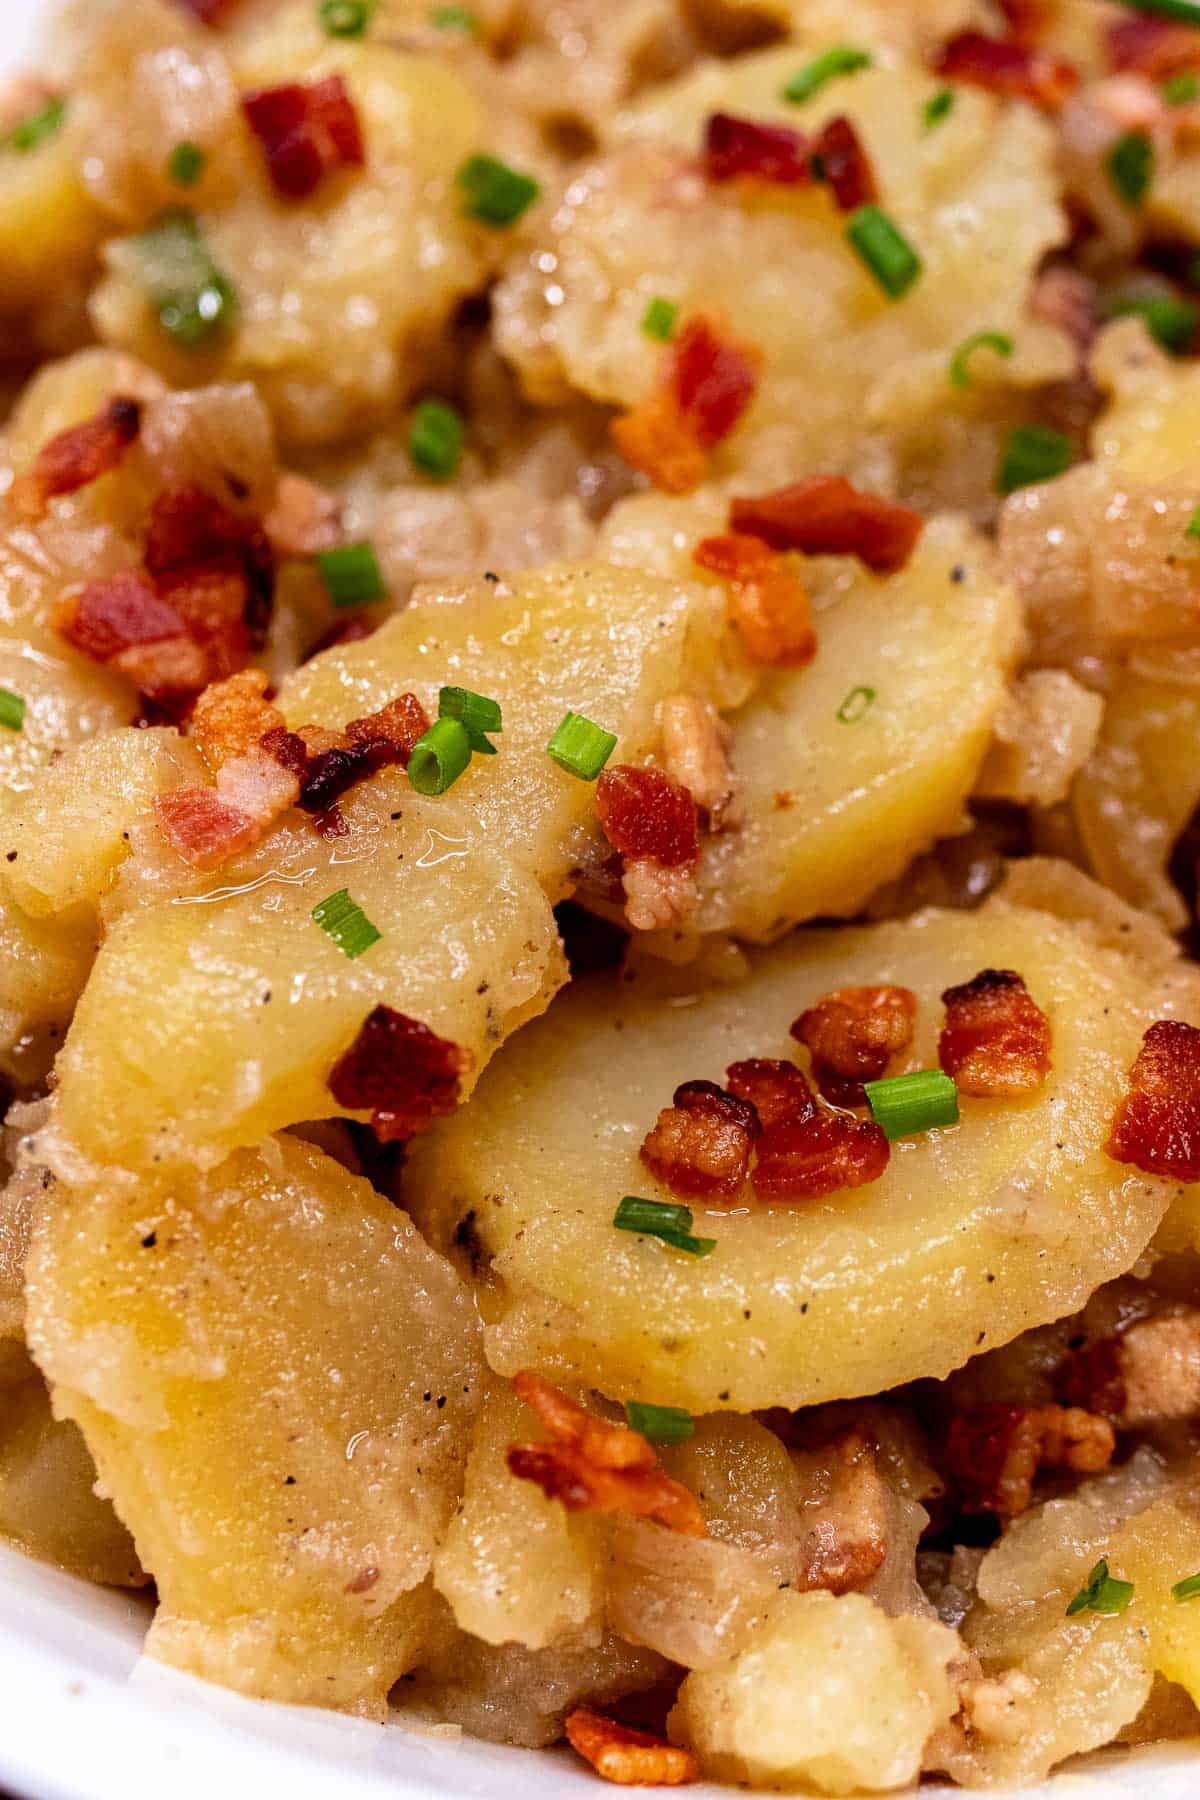 Close up view of Bavarian potato salad topped with bacon bits and chives.